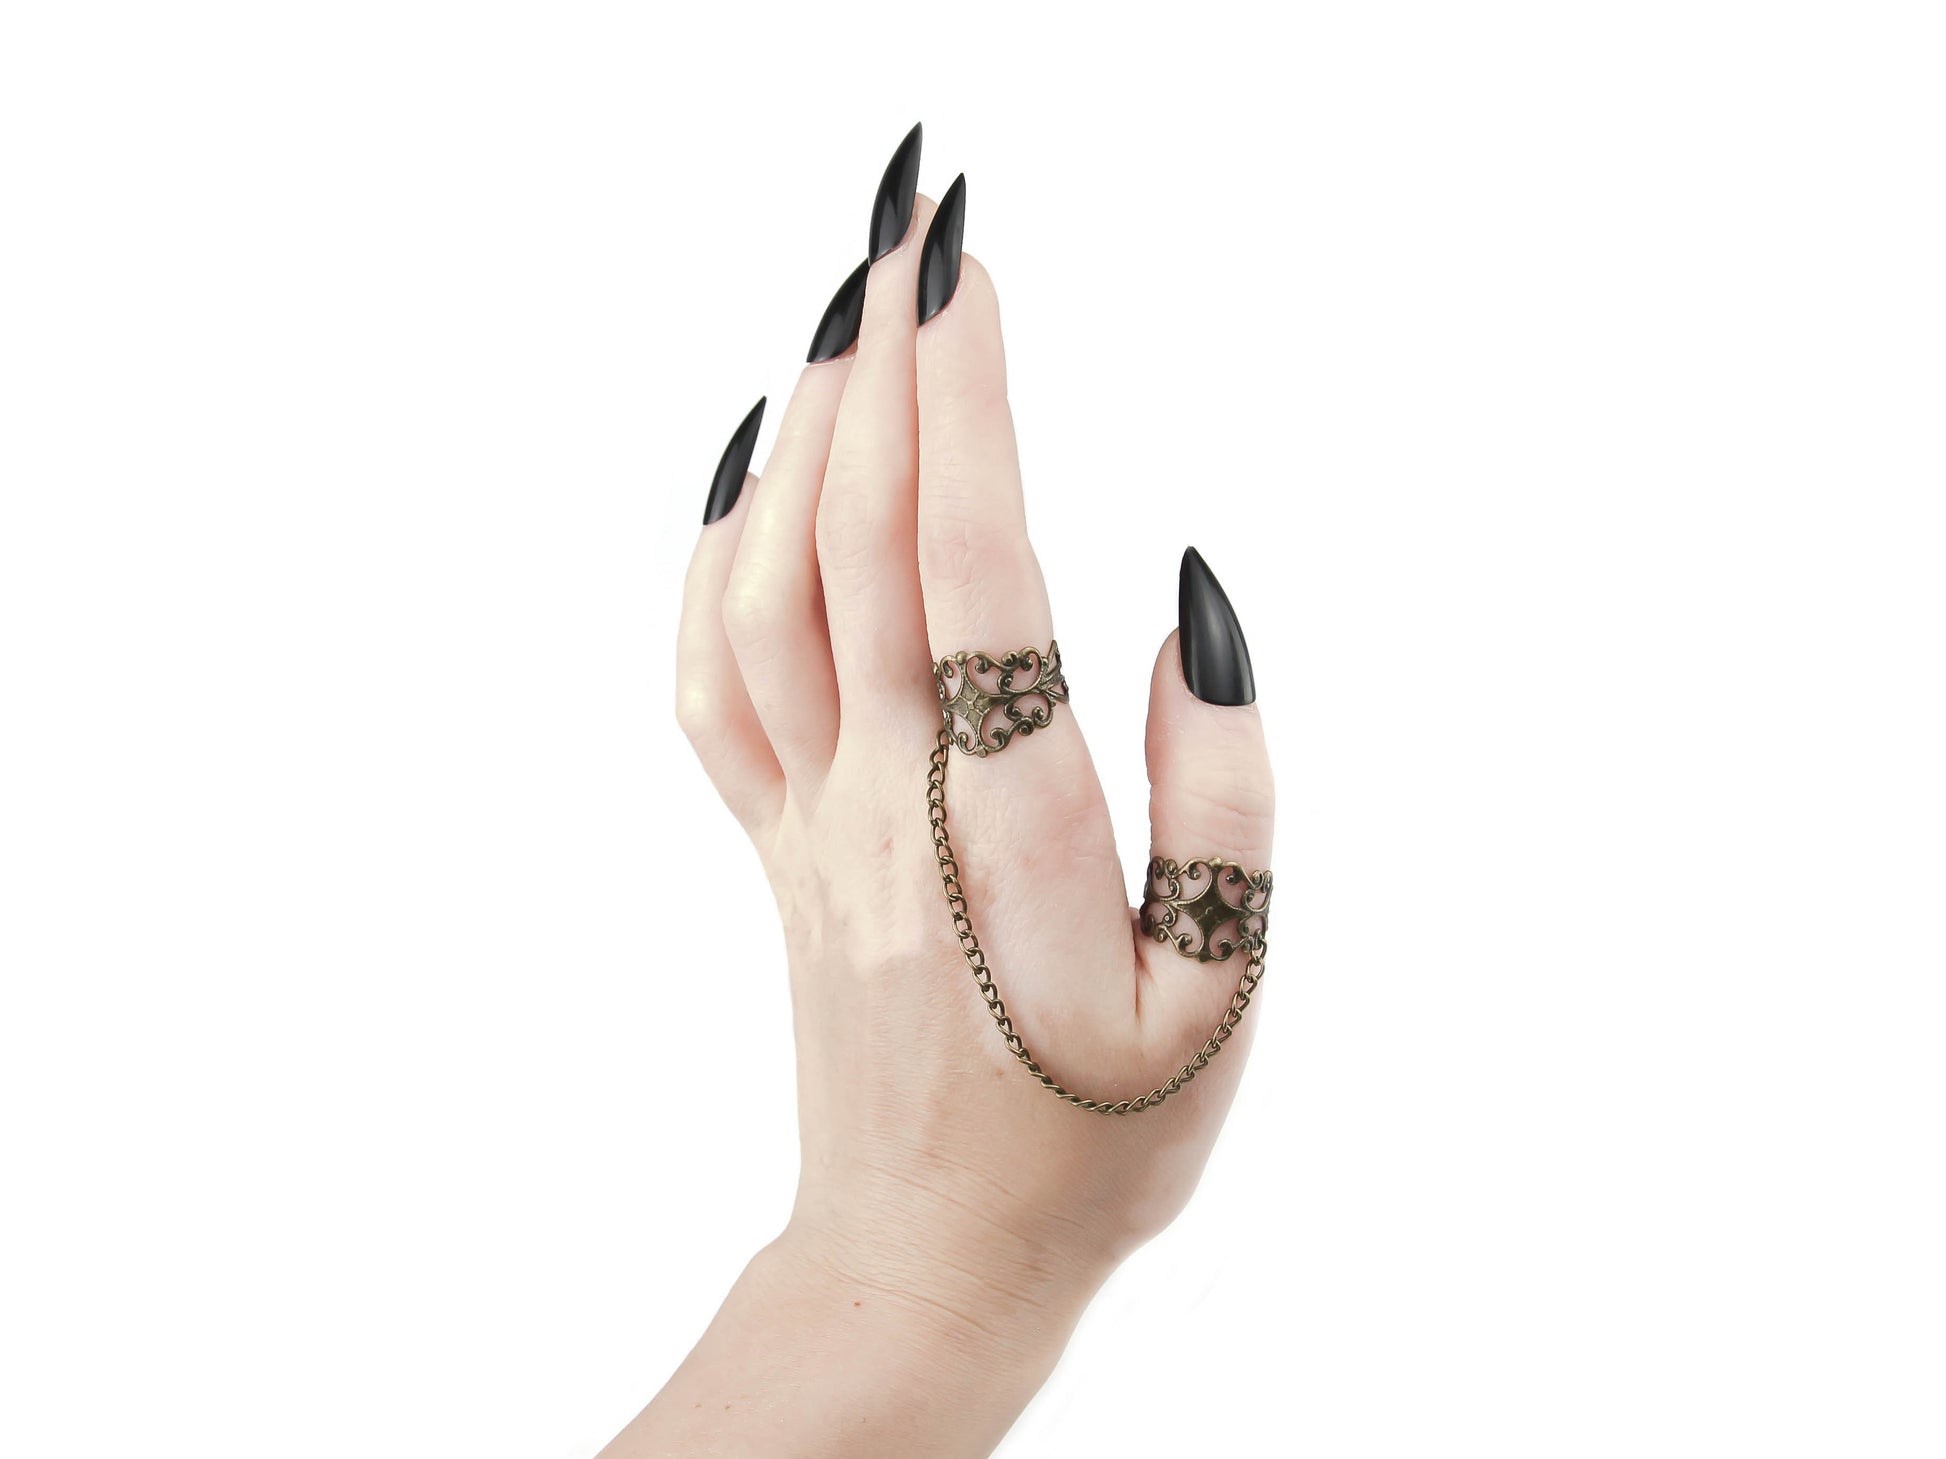 A slender hand with sharp, black nails elegantly showcases Myril Jewels' gothic-chic rings in bronze, connected by a delicate chain, epitomizing dark-avantgarde jewelry. Ideal for punk, neo-gothic, and witchcore enthusiasts, these rings are a must-have accessory for any Halloween or whimsigoth-inspired outfit.